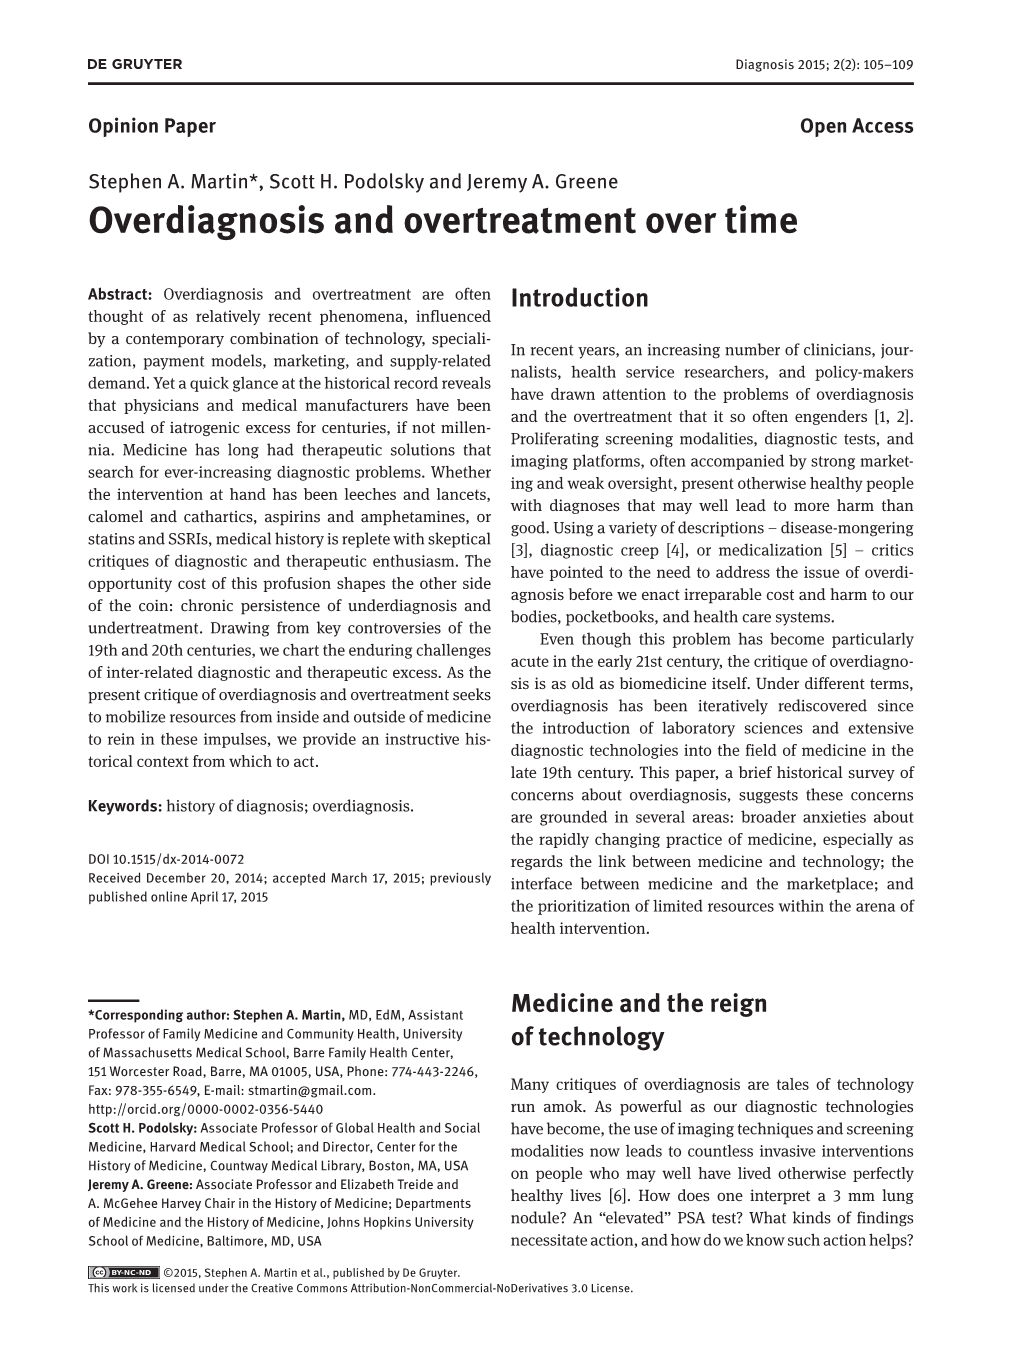 Overdiagnosis and Overtreatment Over Time